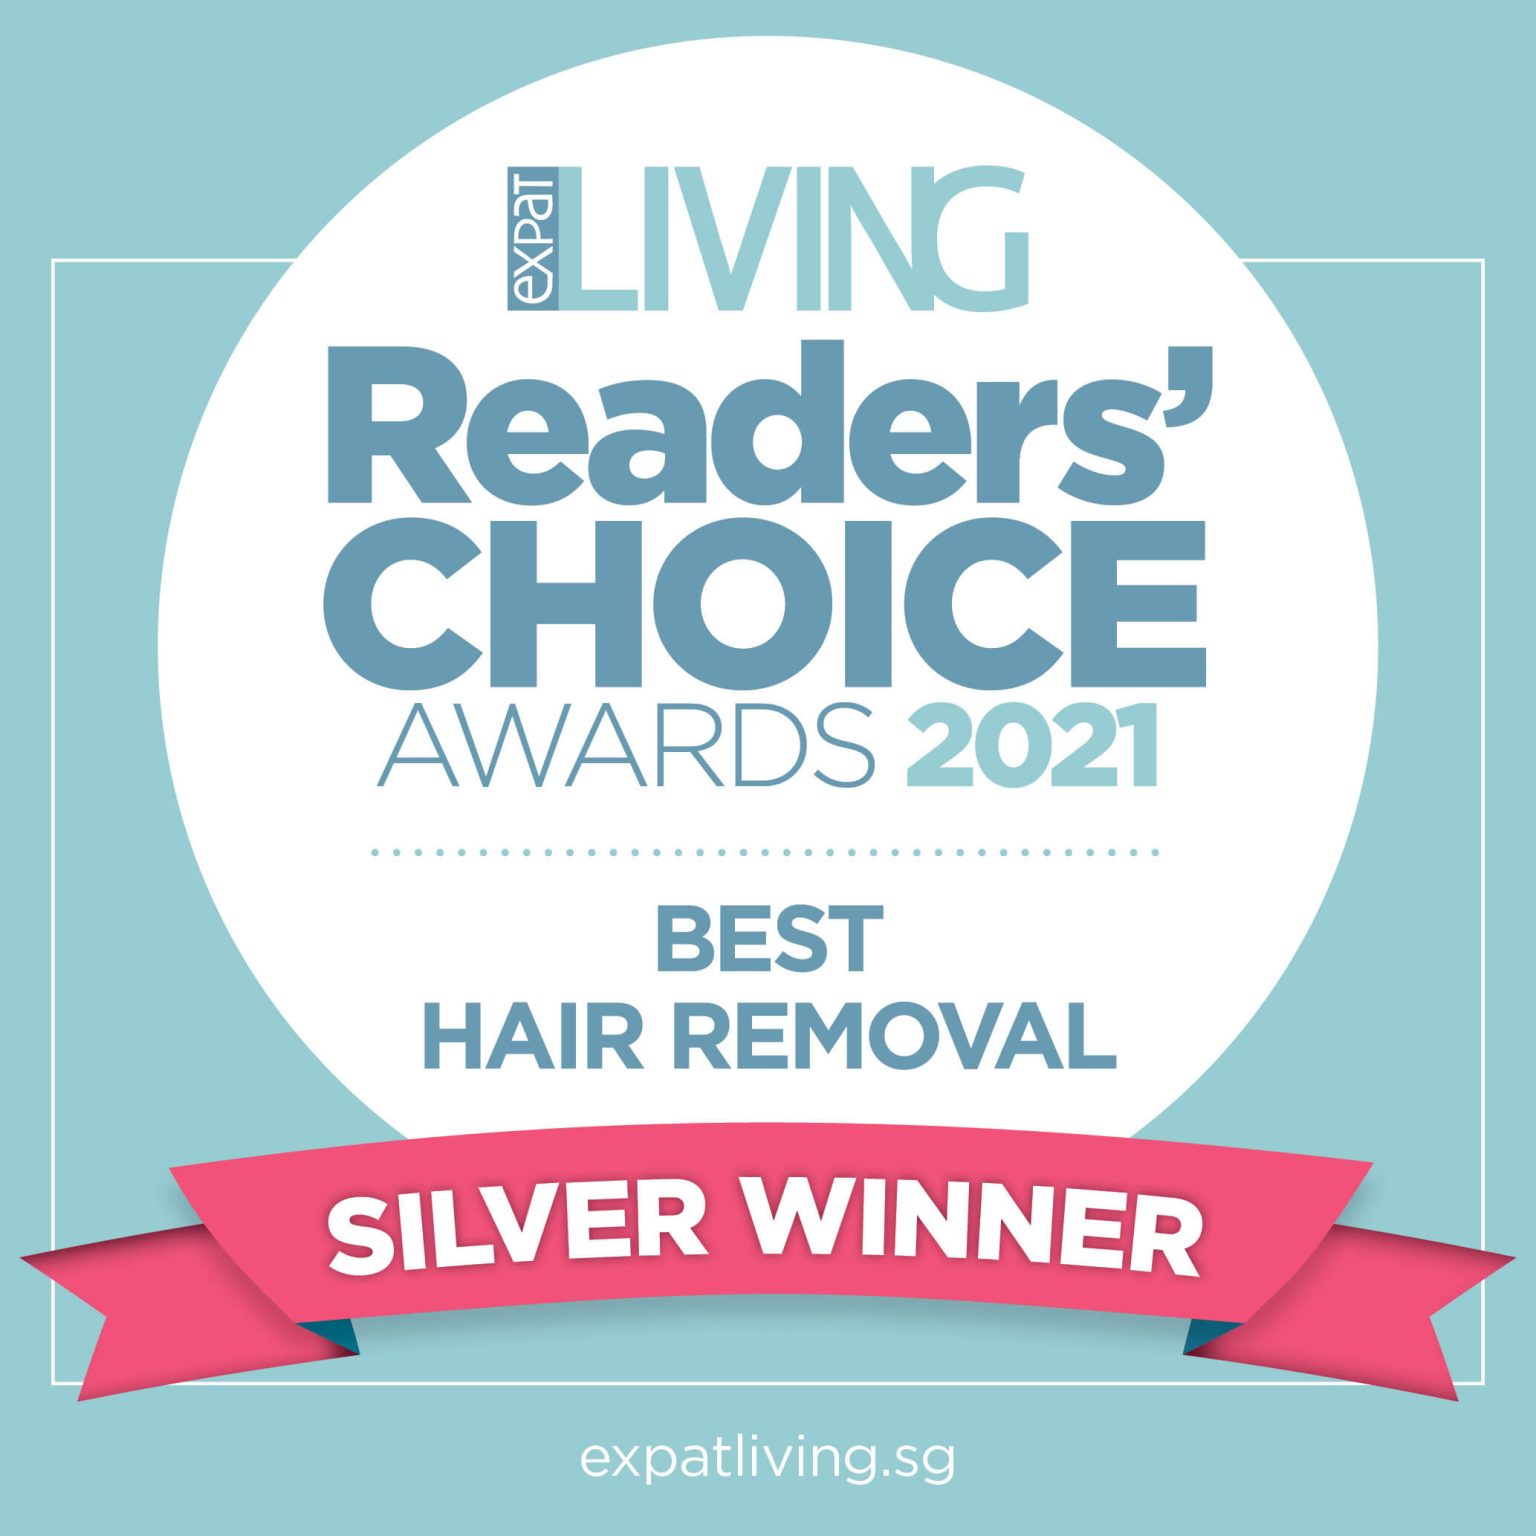 Cutis Wins Silver for Best Hair Removal in EL’s Readers’ Choice Awards 2021